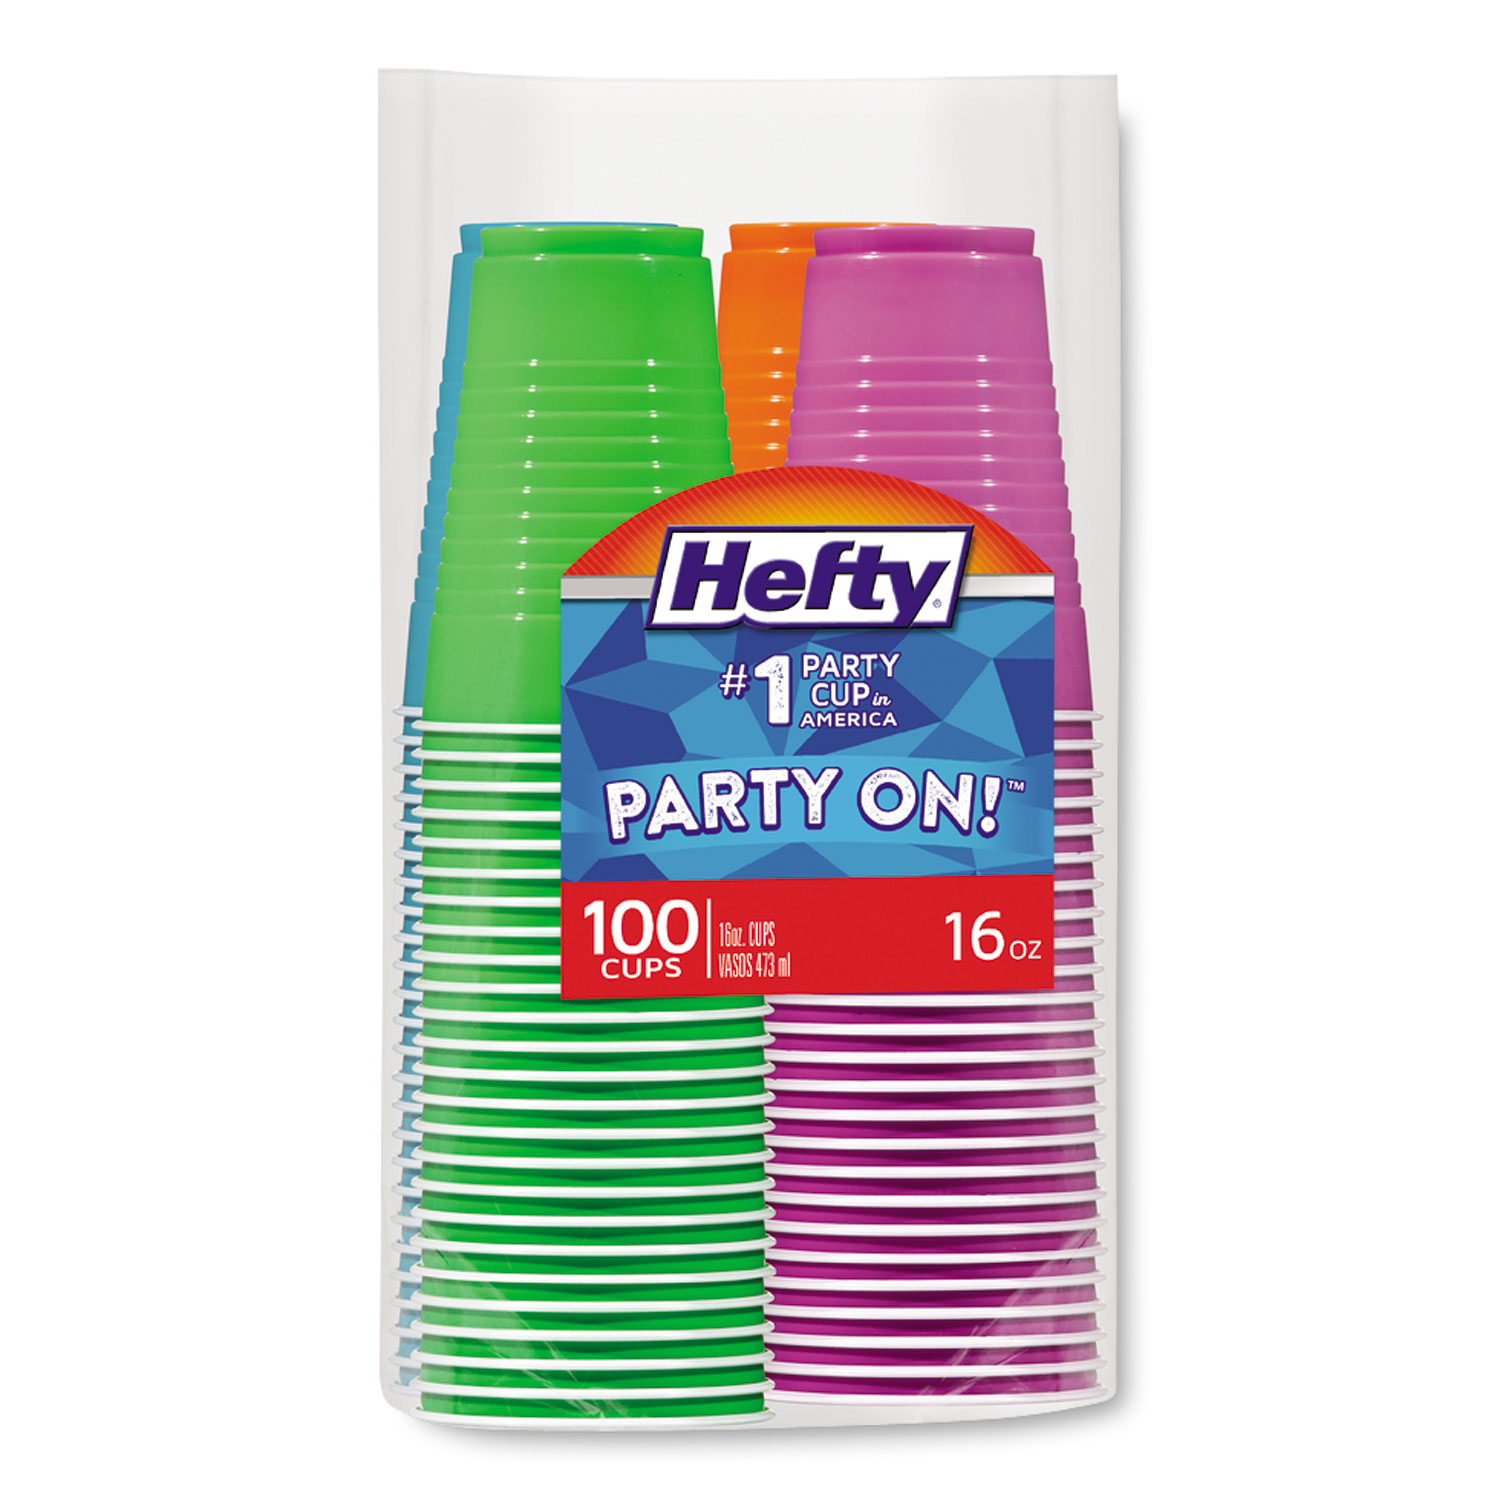  Hefty C21637 Easy Grip Disposable Plastic Party Cups, 16 oz, Assorted, 100/Pack (RFPC21637) 